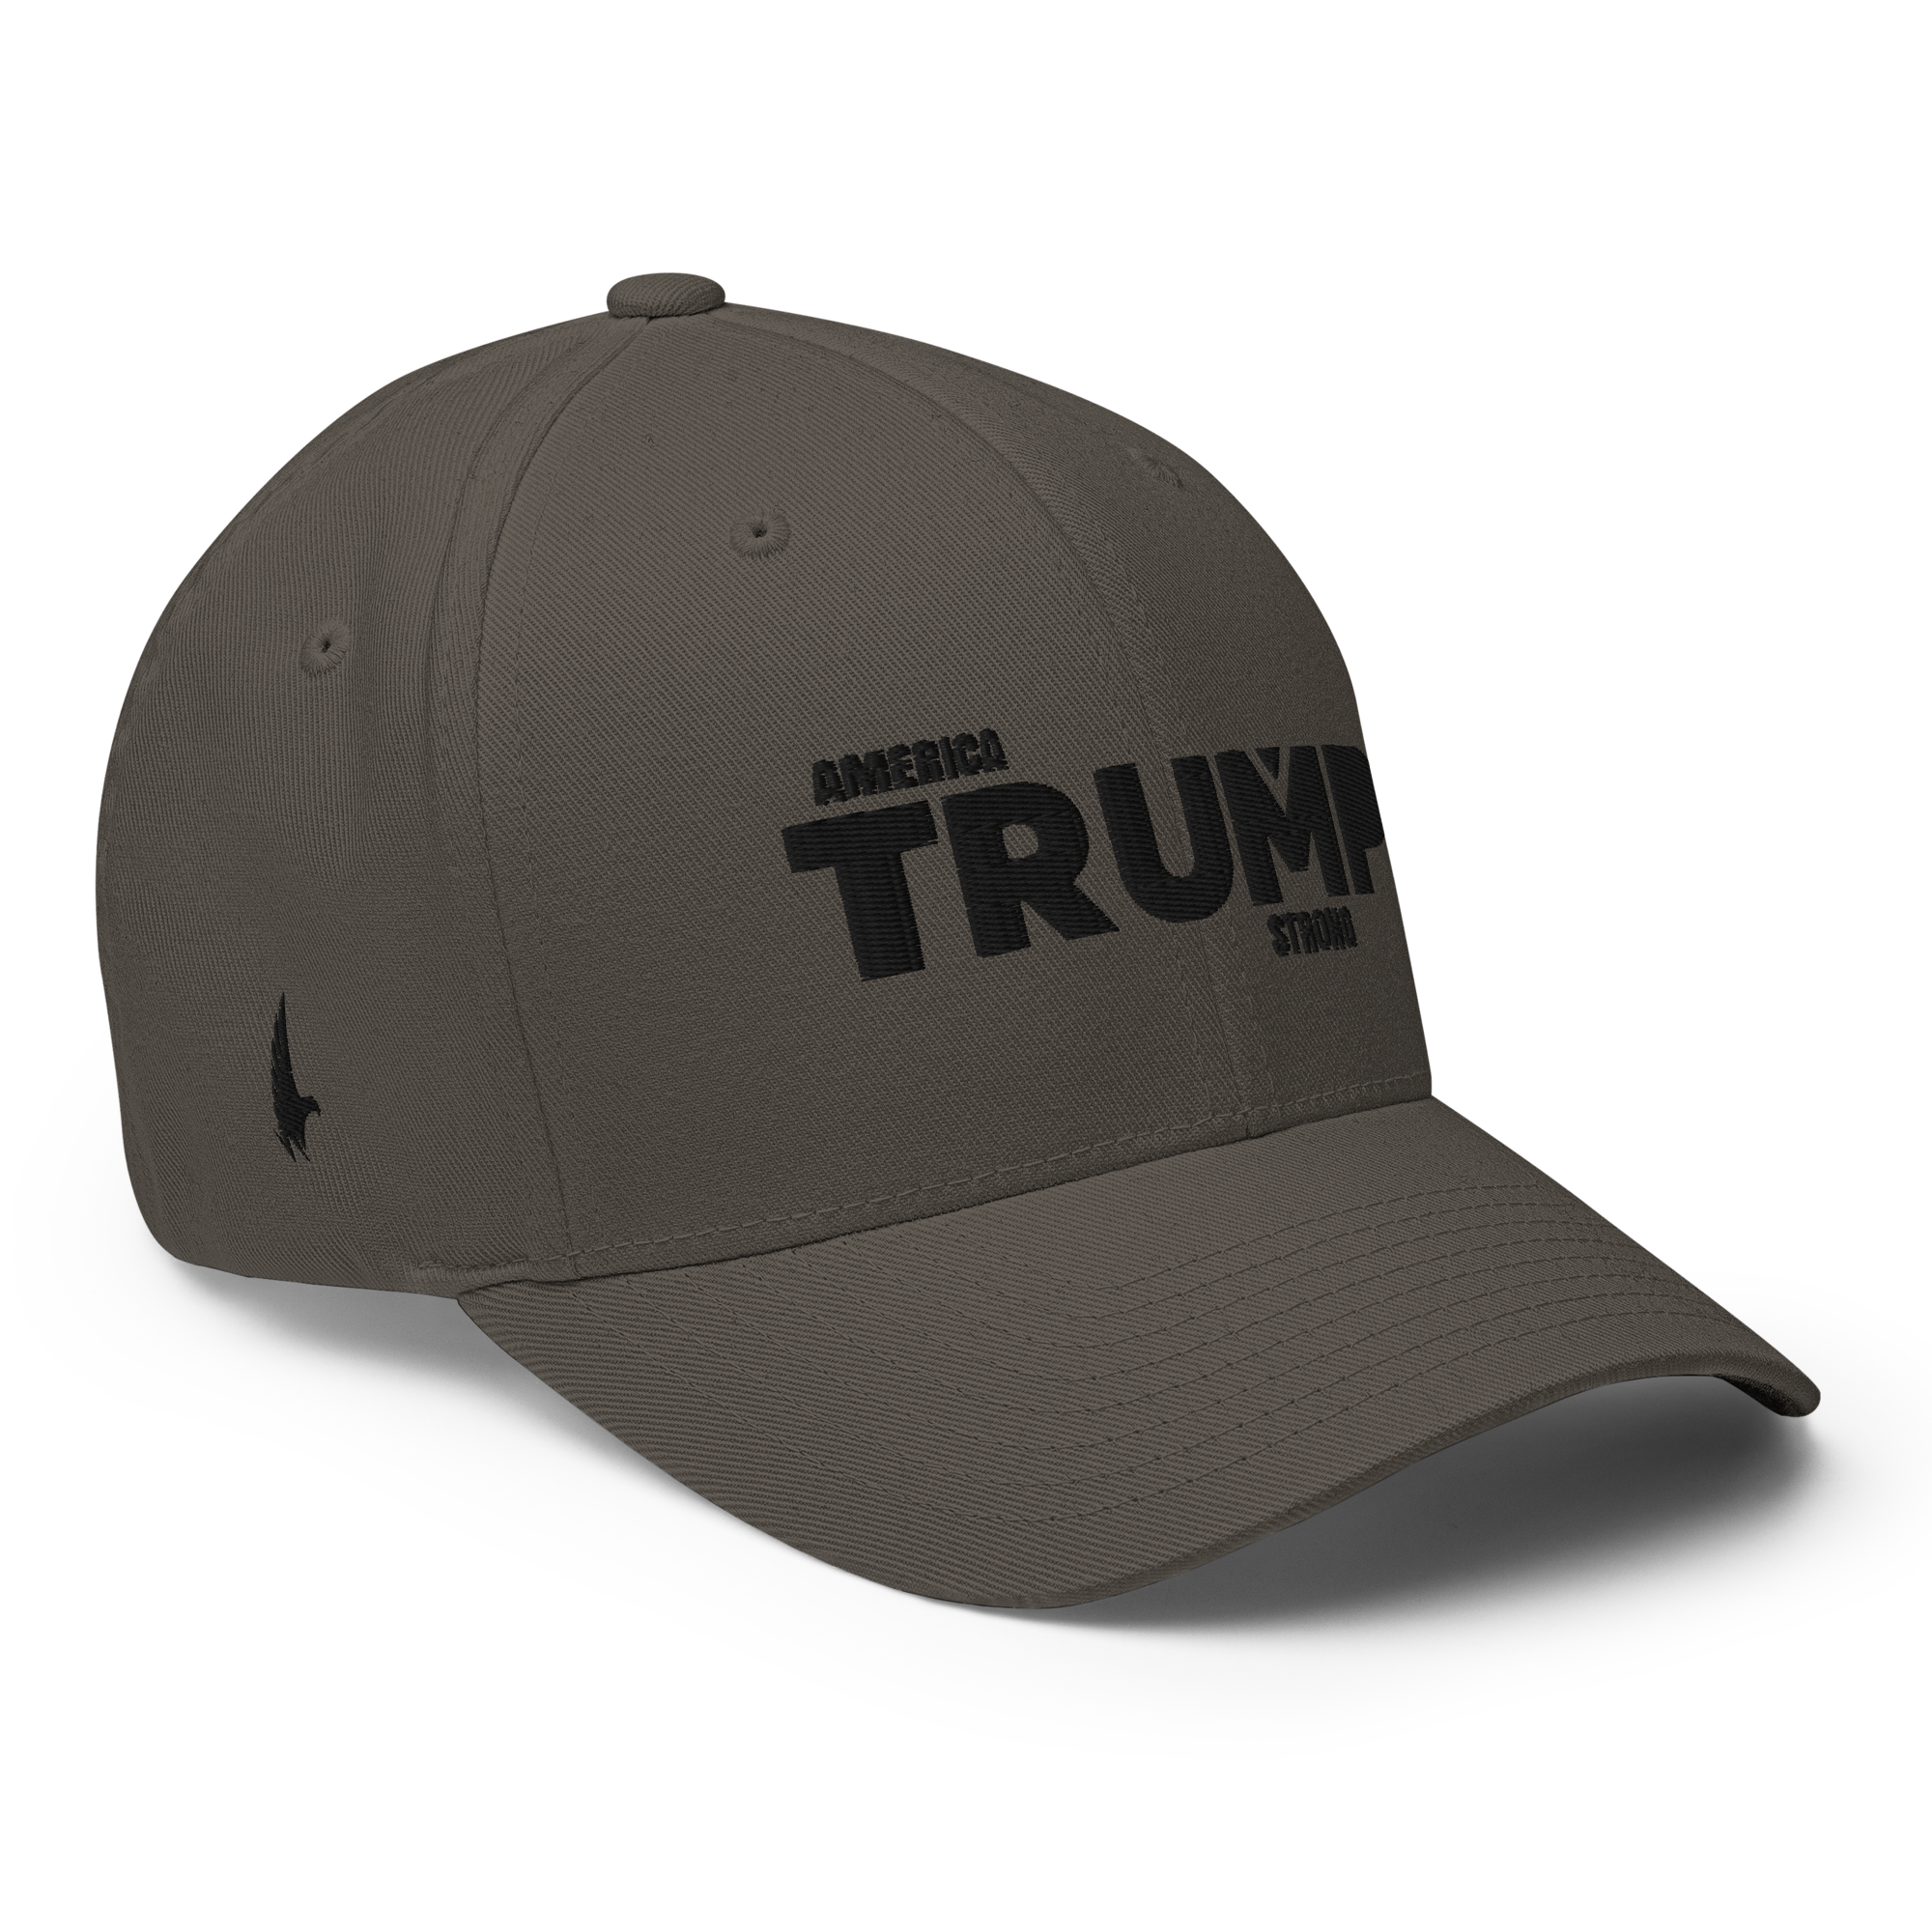 America Strong Trump Flexfit Hat Charcoal Grey / Black Fitted - Loyalty Vibes